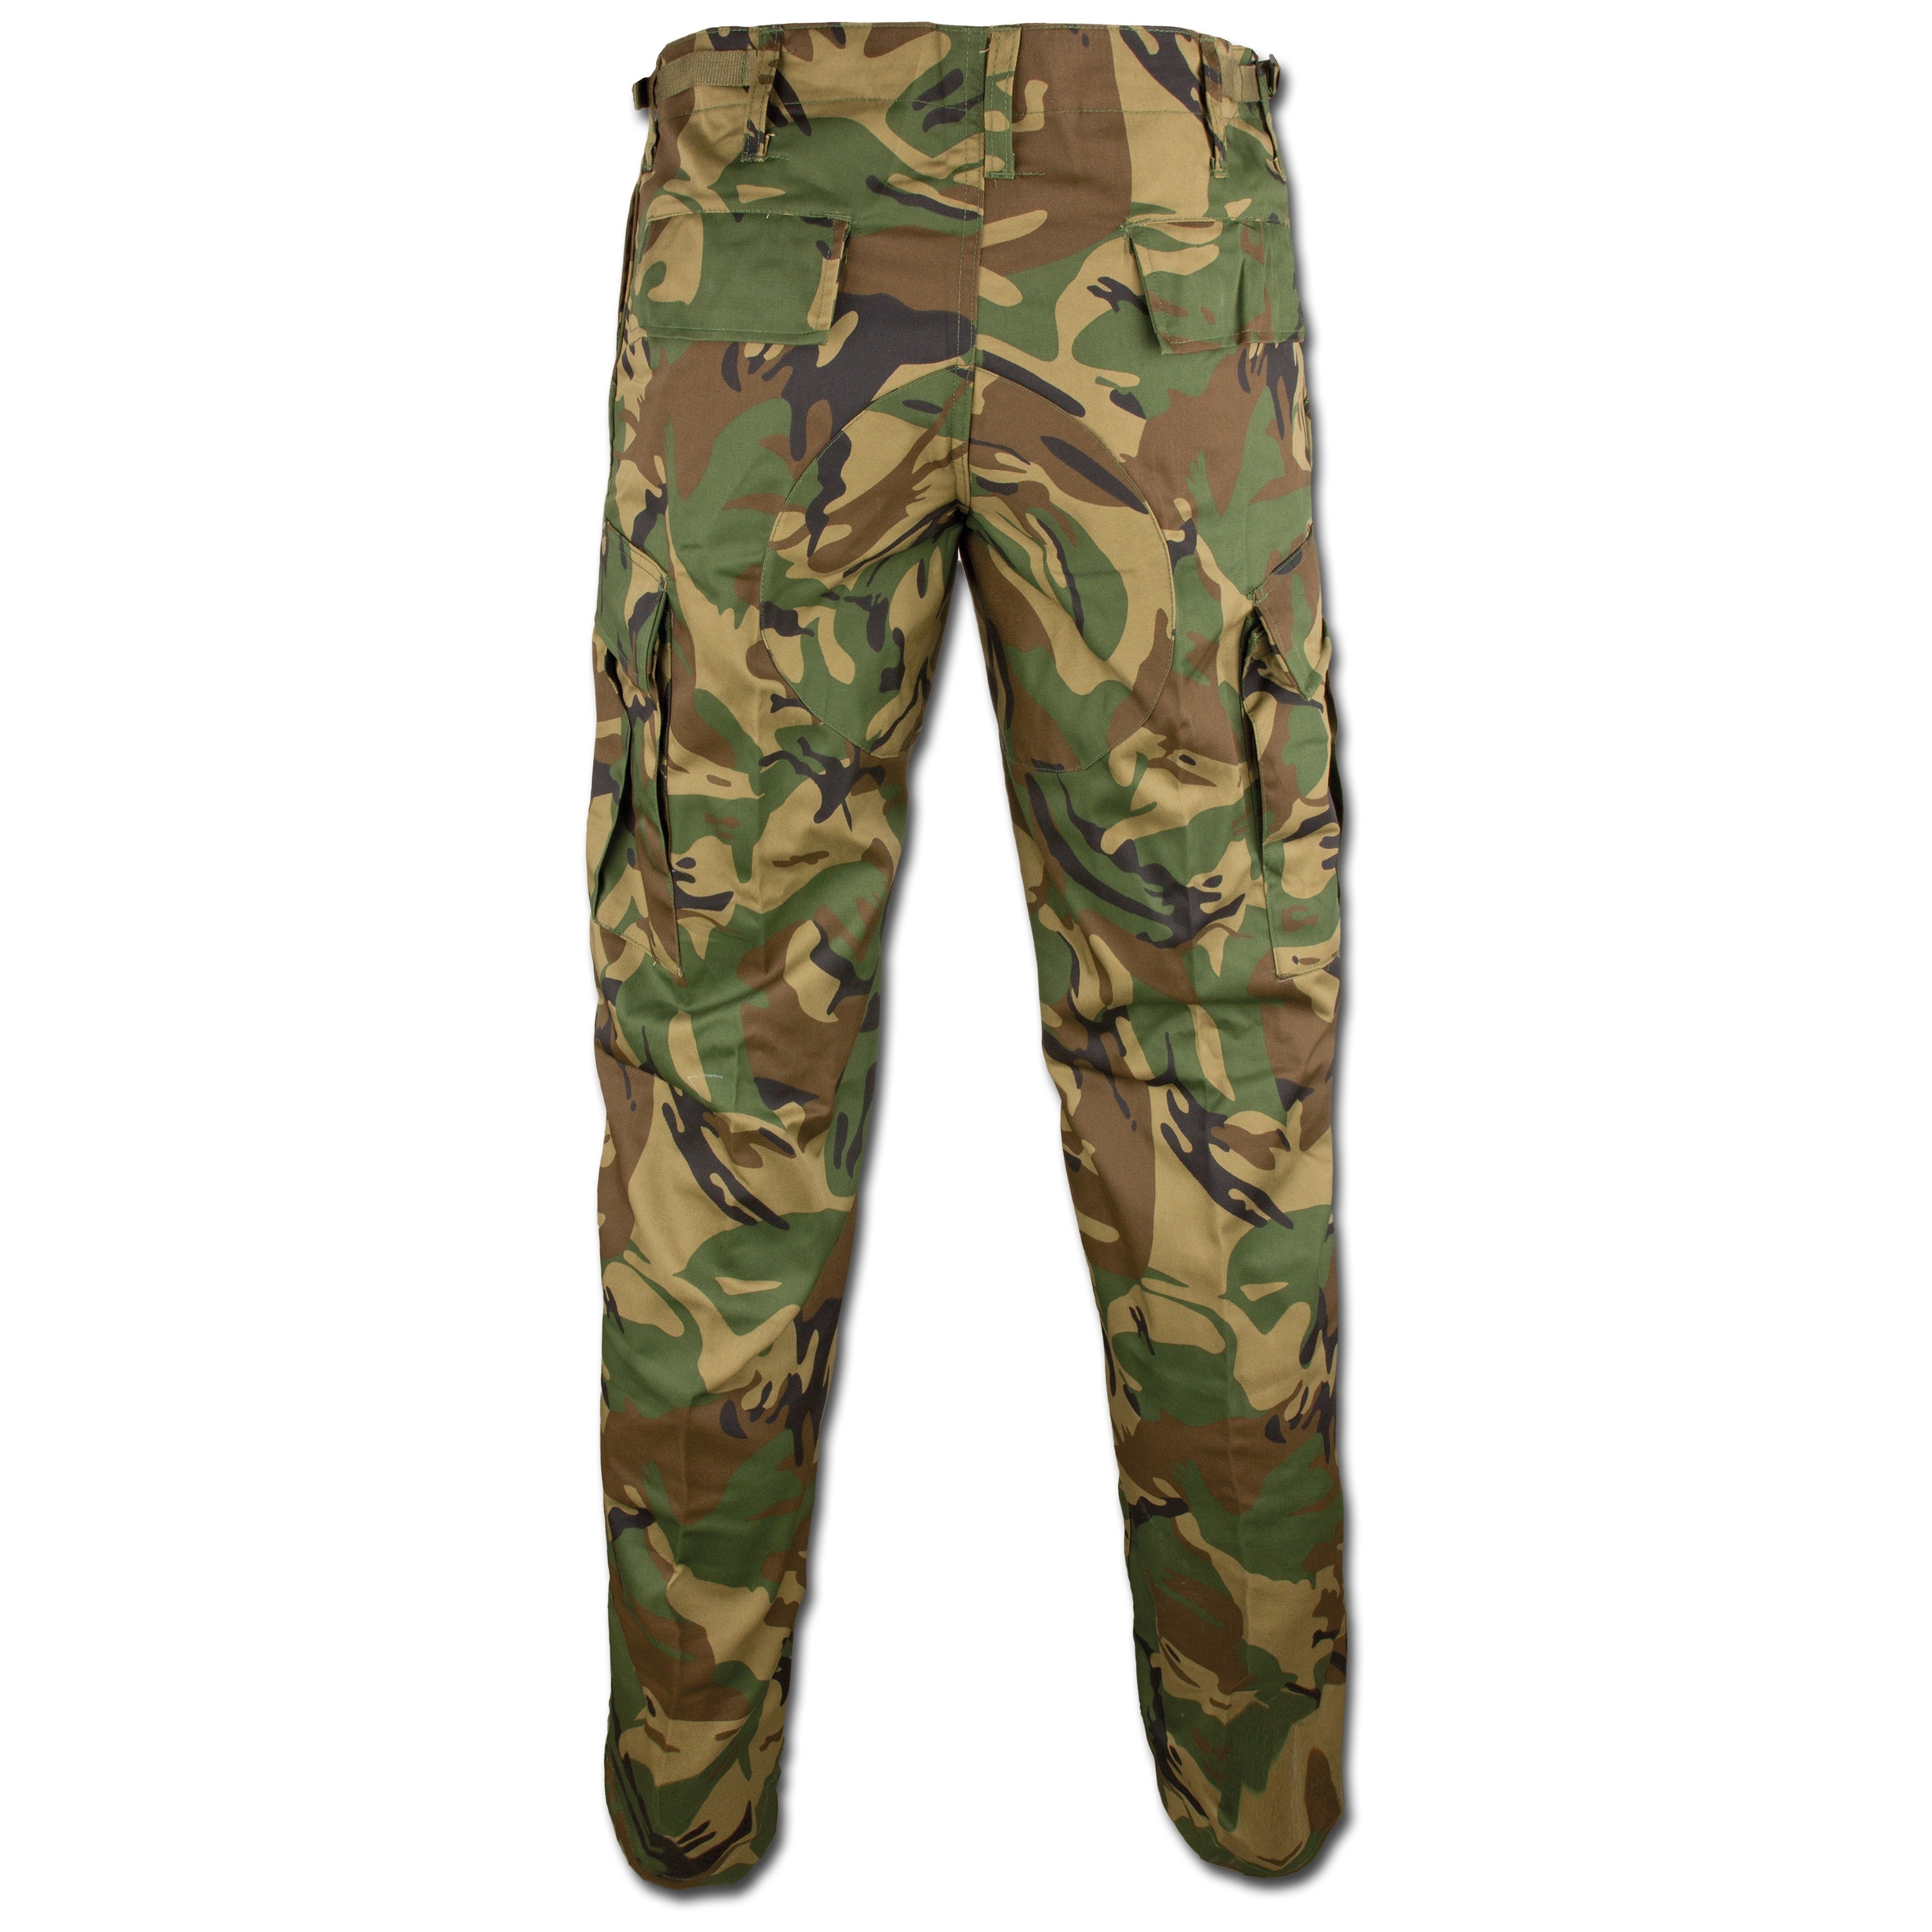 Purchase the MMB U.S. Field Pants BDU Air Force Woodland by ASMC